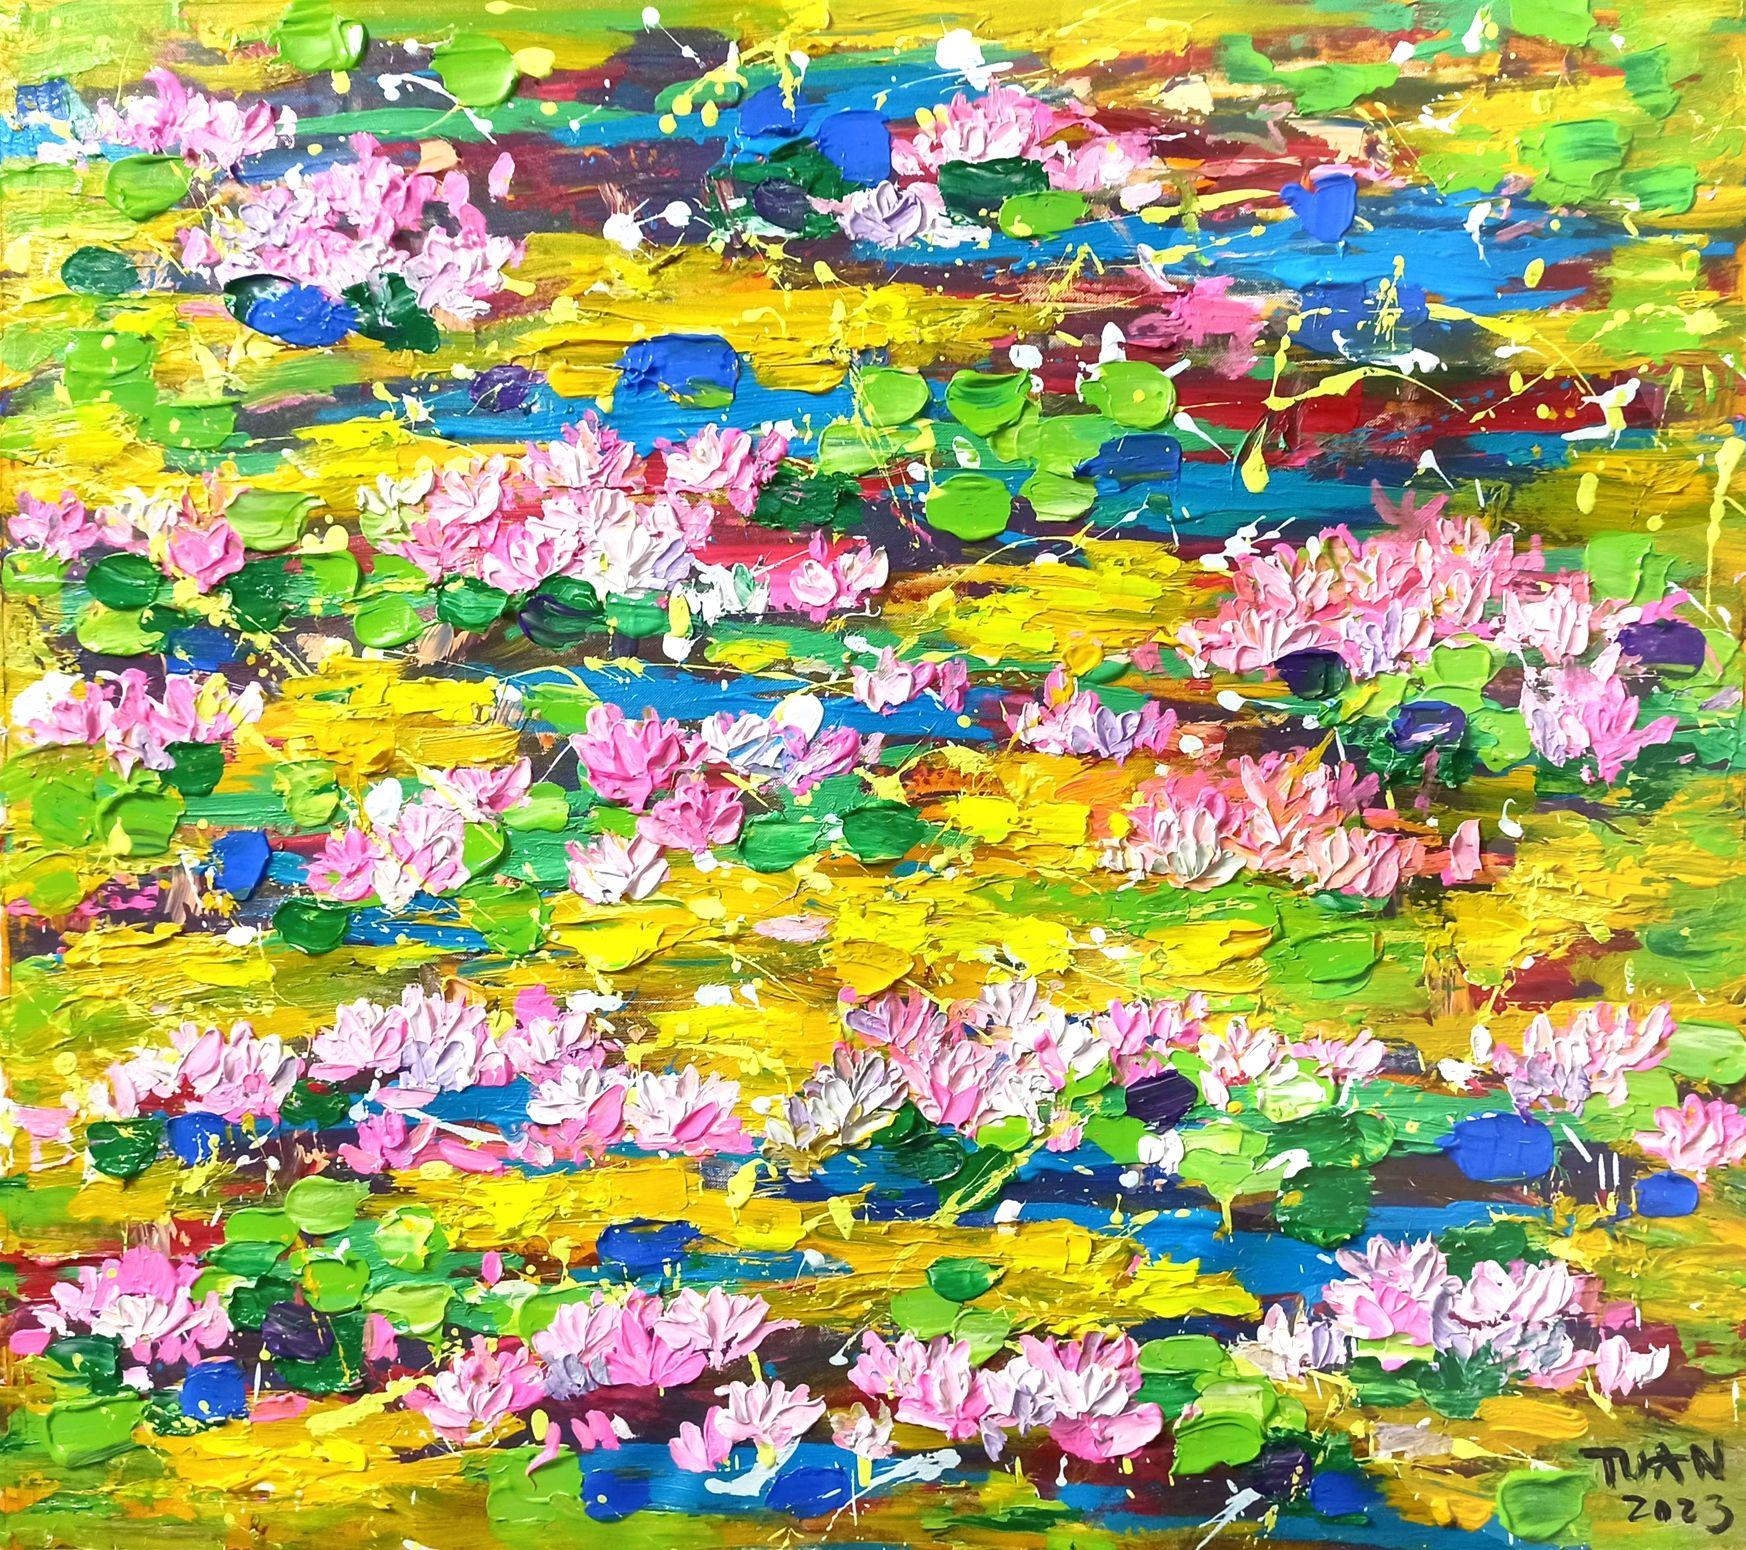 Blooming lilies pond 80x90cm, Painting, Acrylic on Canvas